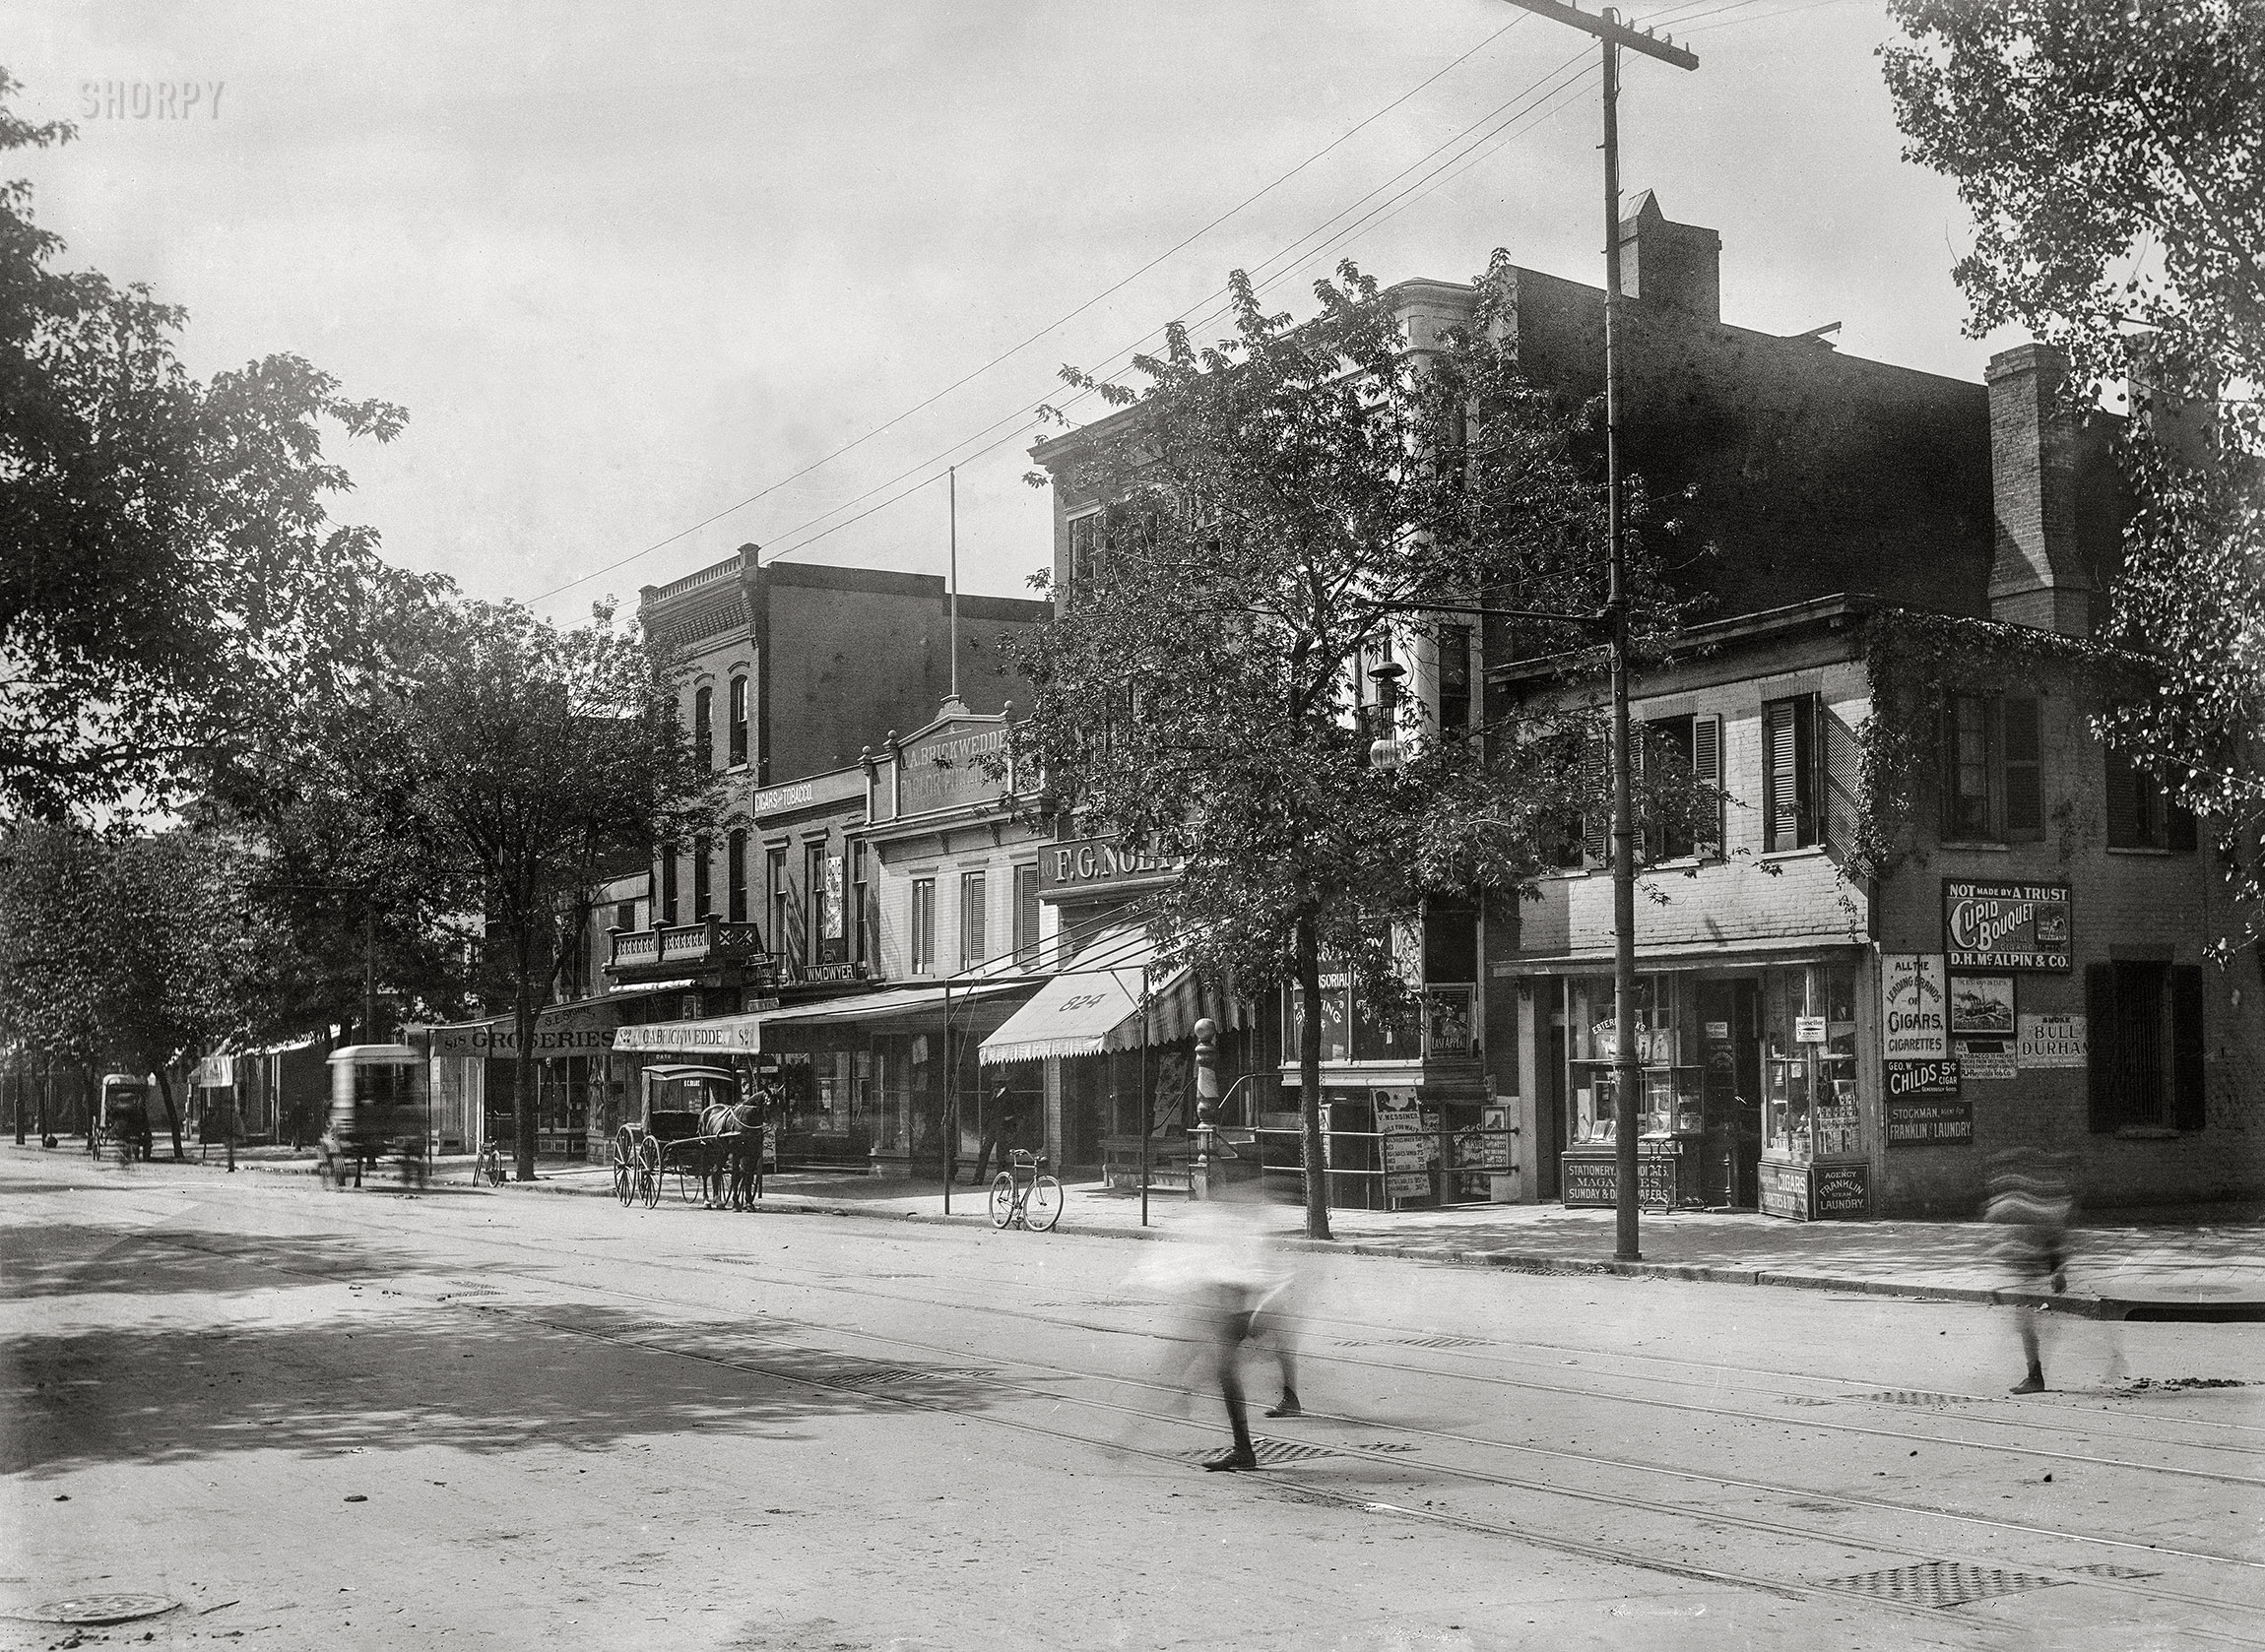 Washington, D.C., circa 1901. "View of Ninth Street N.W., west side, looking south from I Street." 5x7 inch glass negative, D.C. Street Survey Collection. View full size.